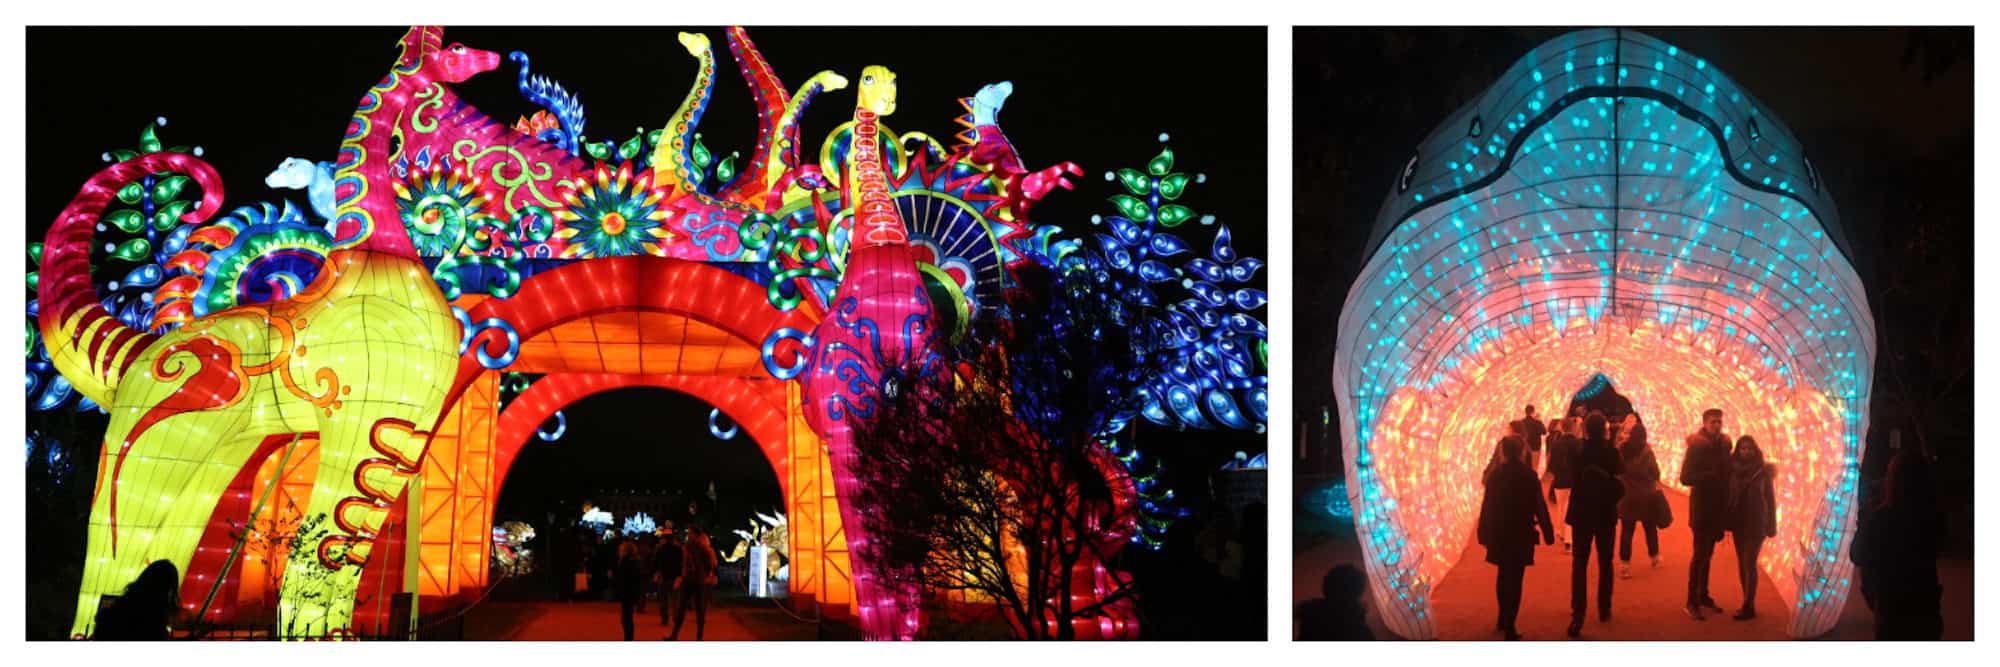 This Christmas in Paris, the Jardin des Plantes (garden of plants) put on an incredible show of colorfully-lit animal figures.